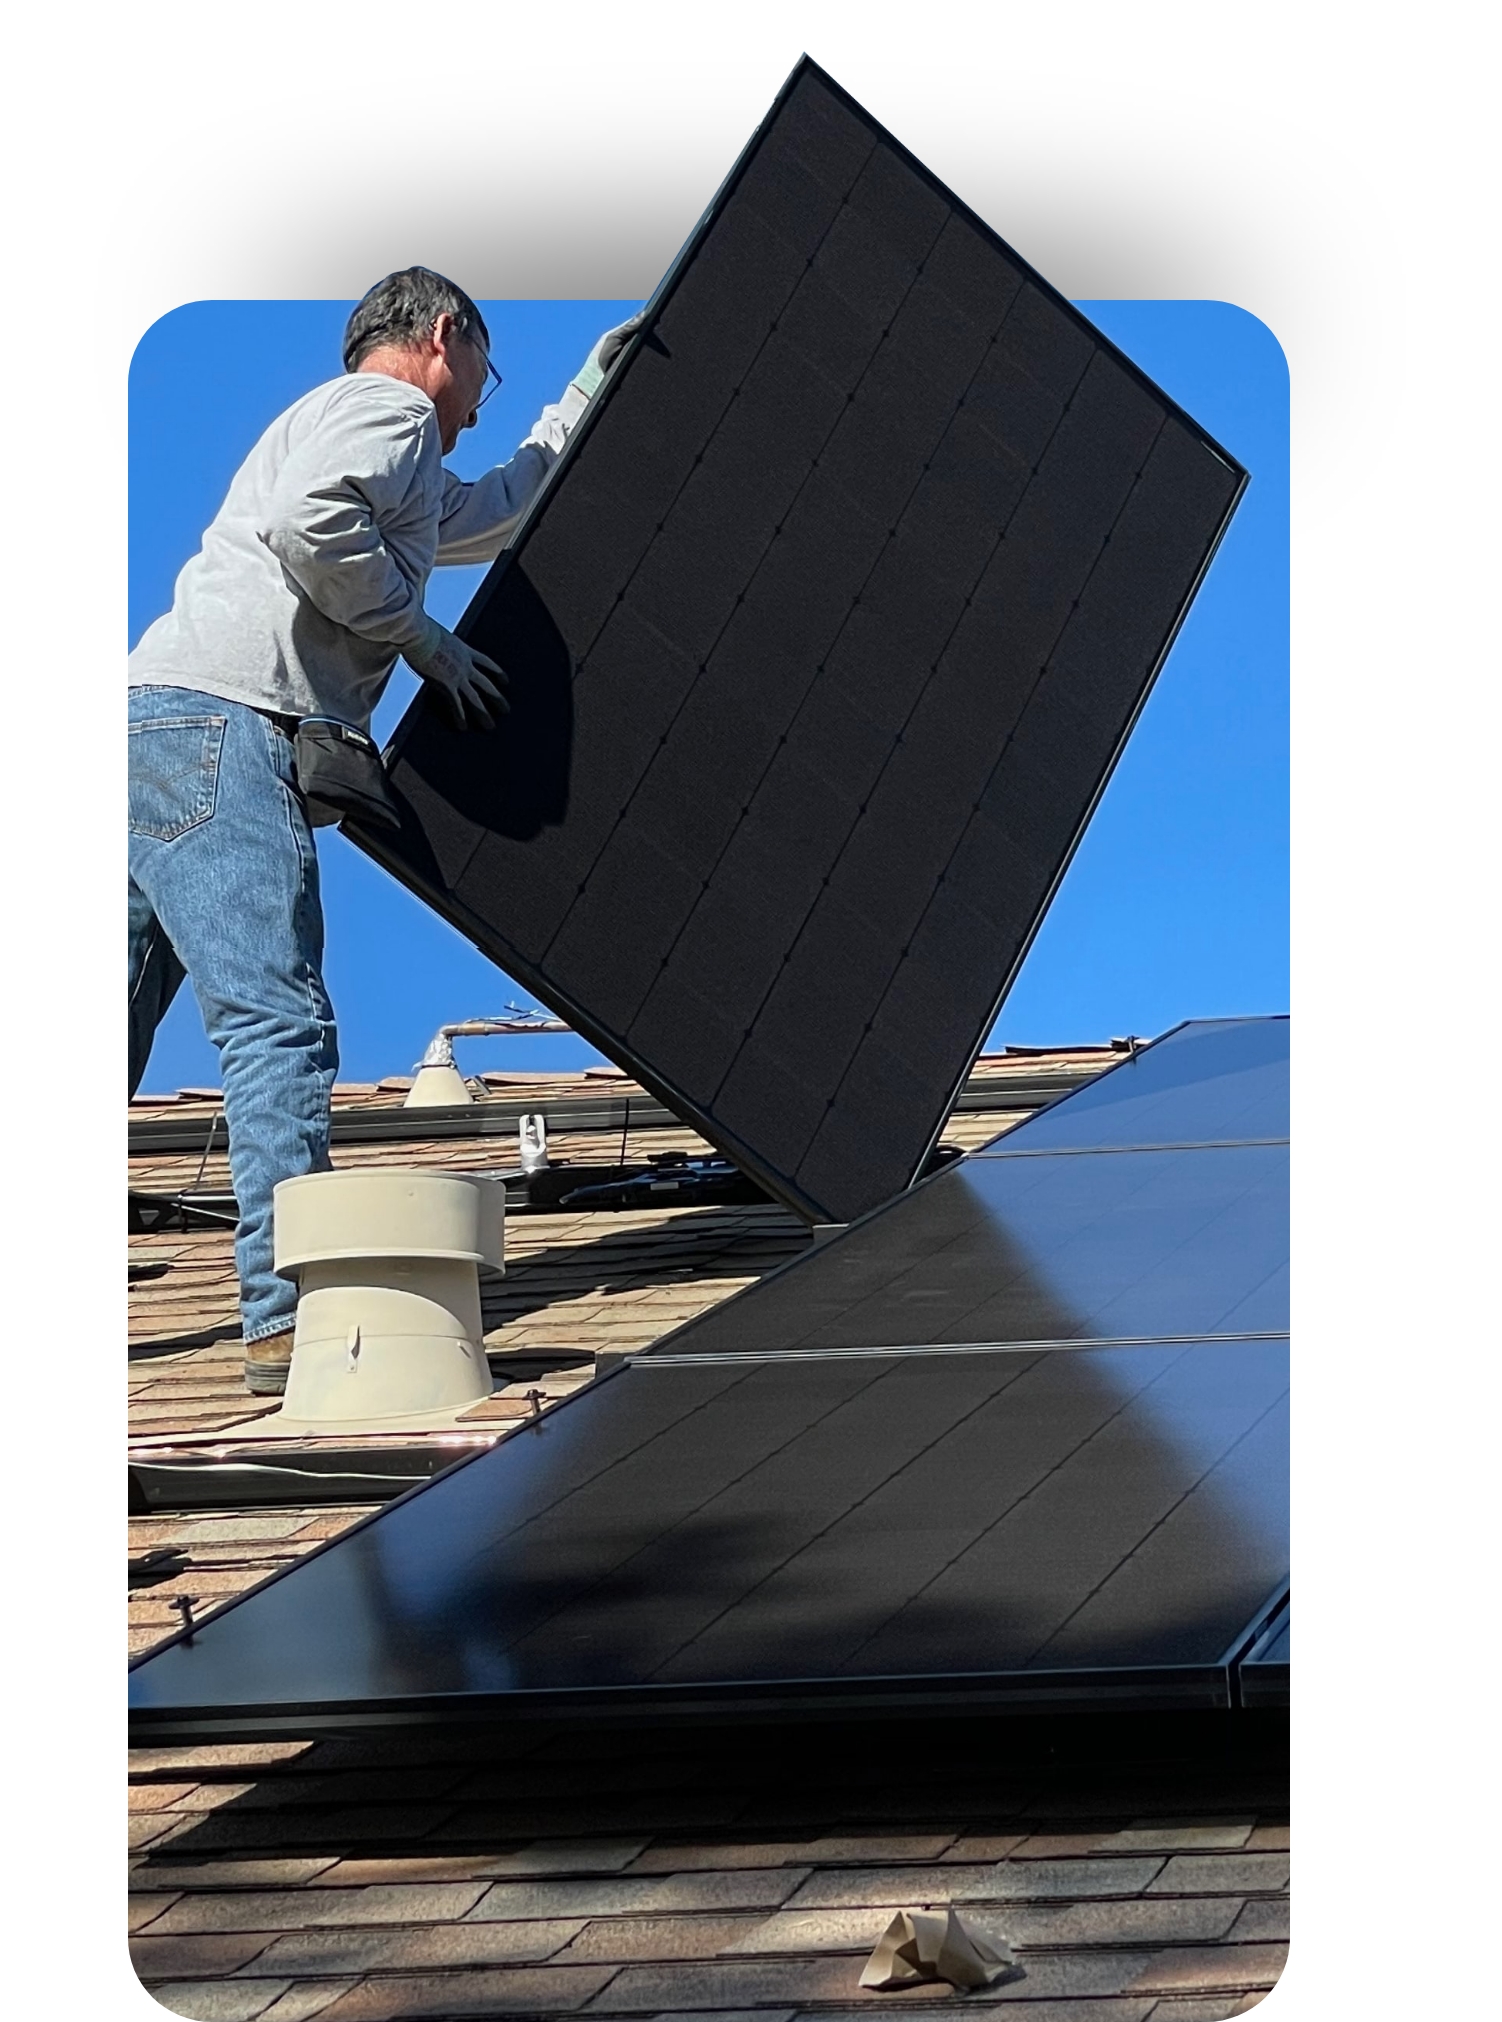 Solar by Peak to Peak can handle any residential solar project in or around Westminster, CO